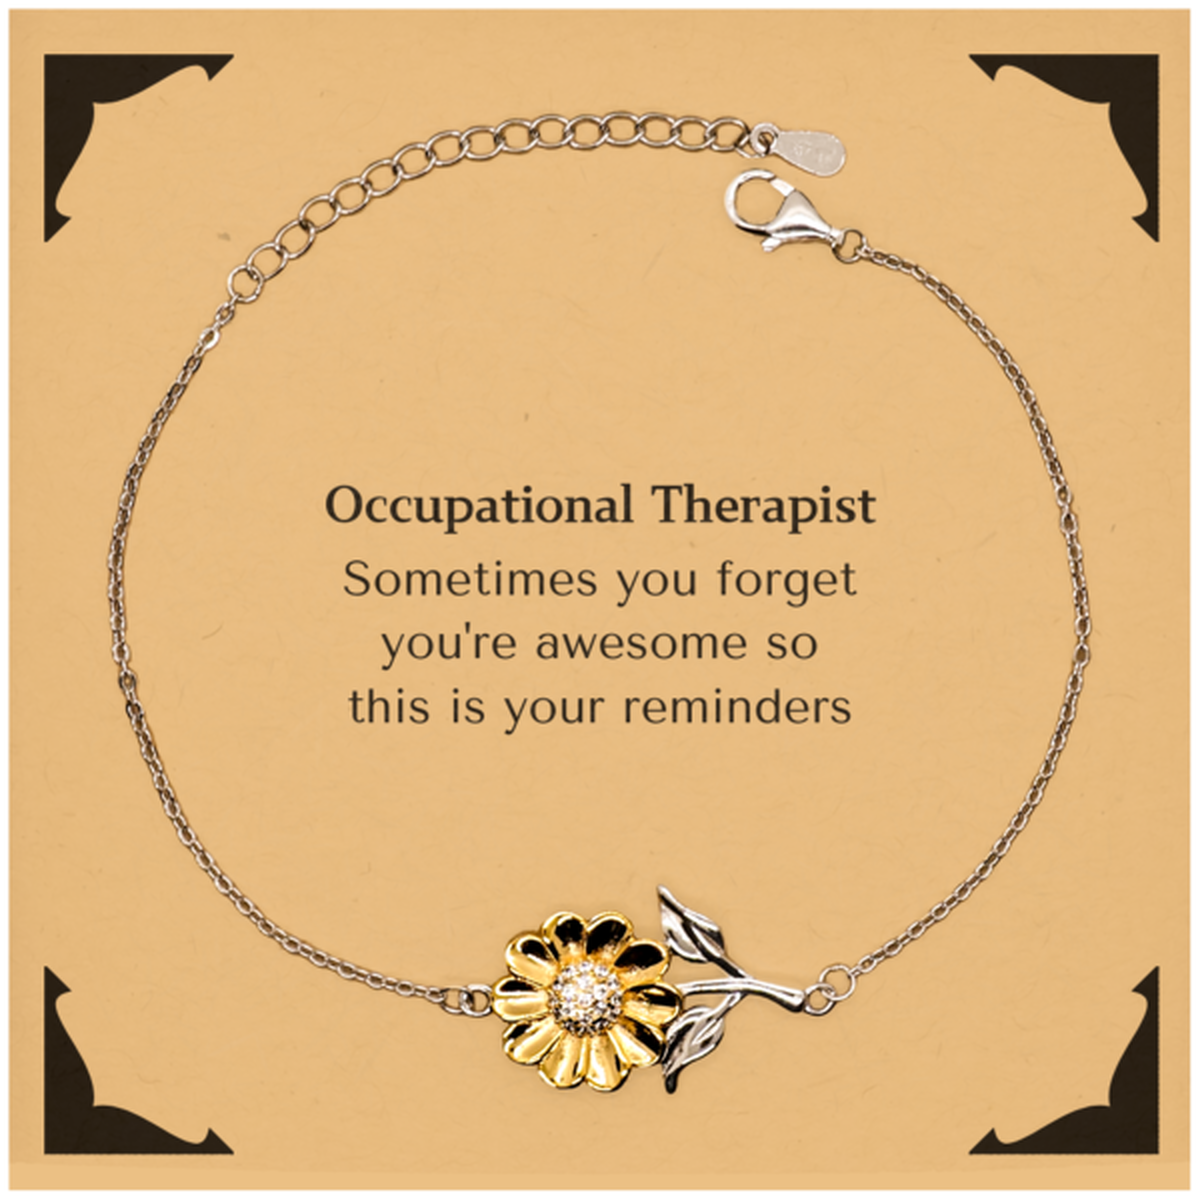 Sentimental Occupational Therapist Sunflower Bracelet, Occupational Therapist Sometimes you forget you're awesome so this is your reminders, Graduation Christmas Birthday Gifts for Occupational Therapist, Men, Women, Coworkers